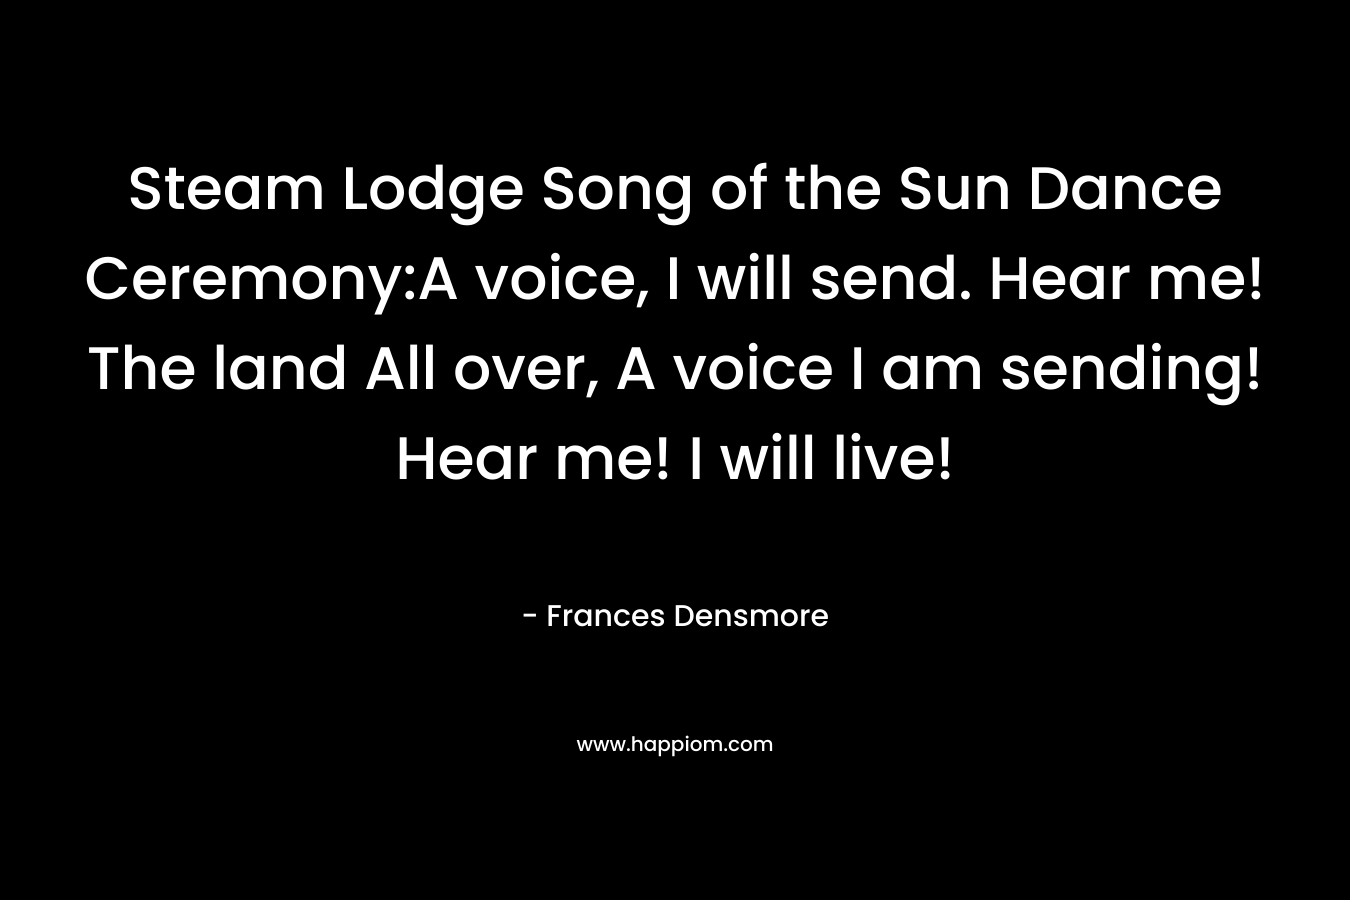 Steam Lodge Song of the Sun Dance Ceremony:A voice, I will send. Hear me! The land All over, A voice I am sending! Hear me! I will live! 